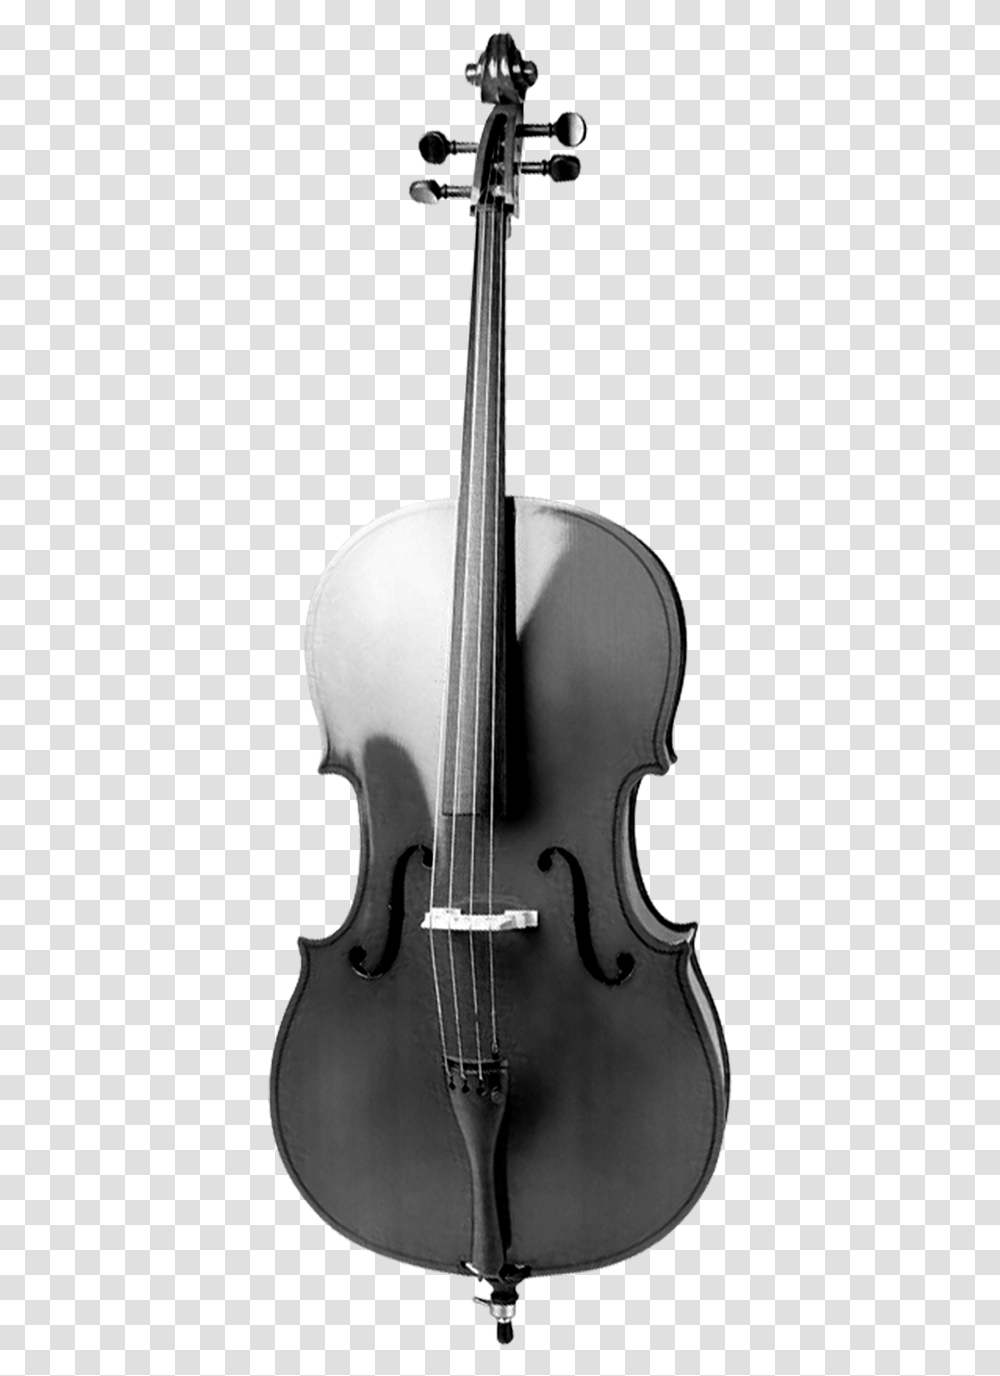 Images Pngs Cello Cellos Cello, Musical Instrument, Guitar, Leisure Activities Transparent Png